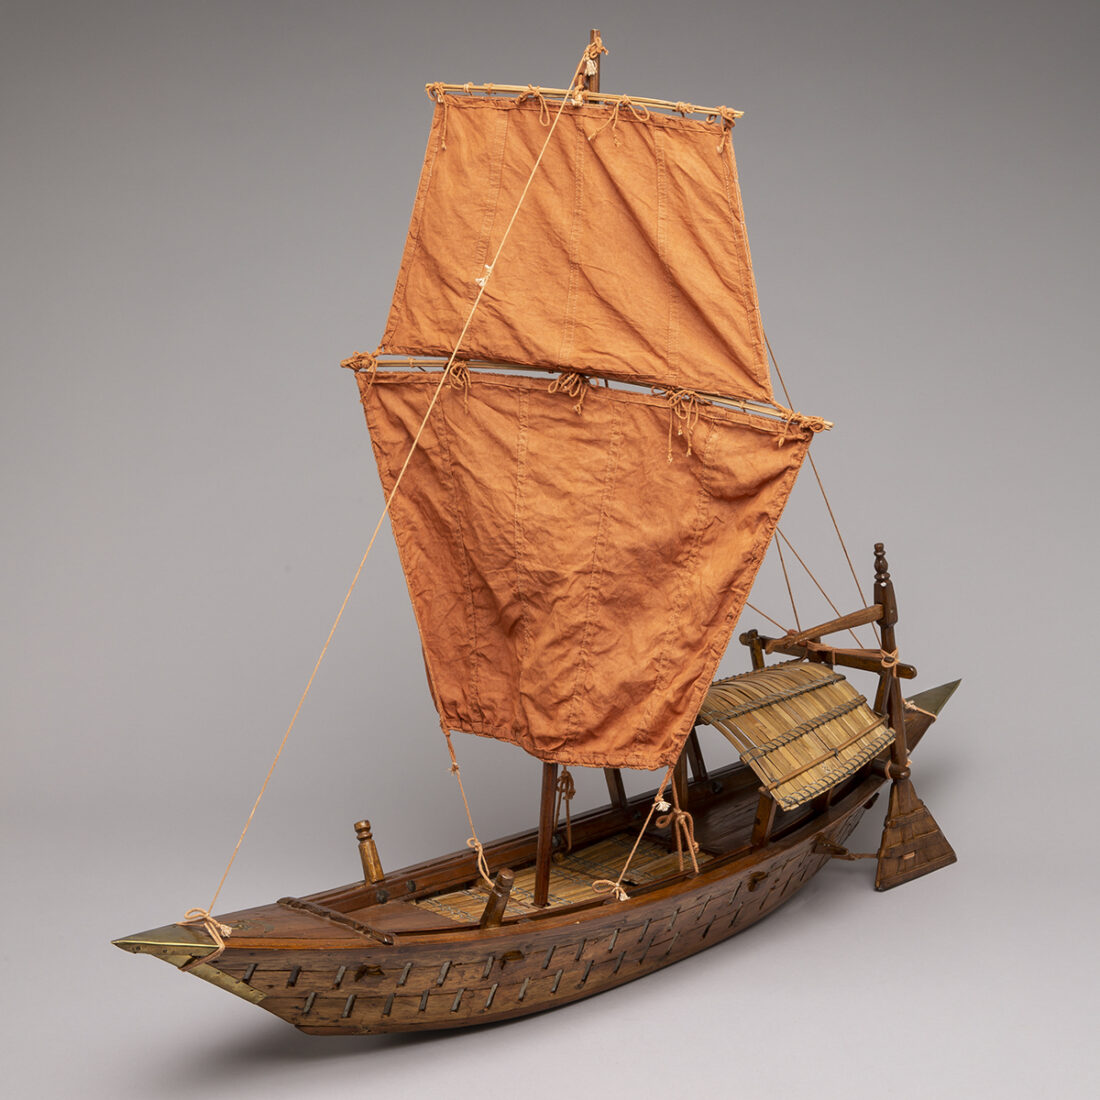 Model of Boat for the transport of timber, Bangladeshi boat builders, Khulna, Bangladesh, before 2005, Ganges Delta, Wood, metal, fabric